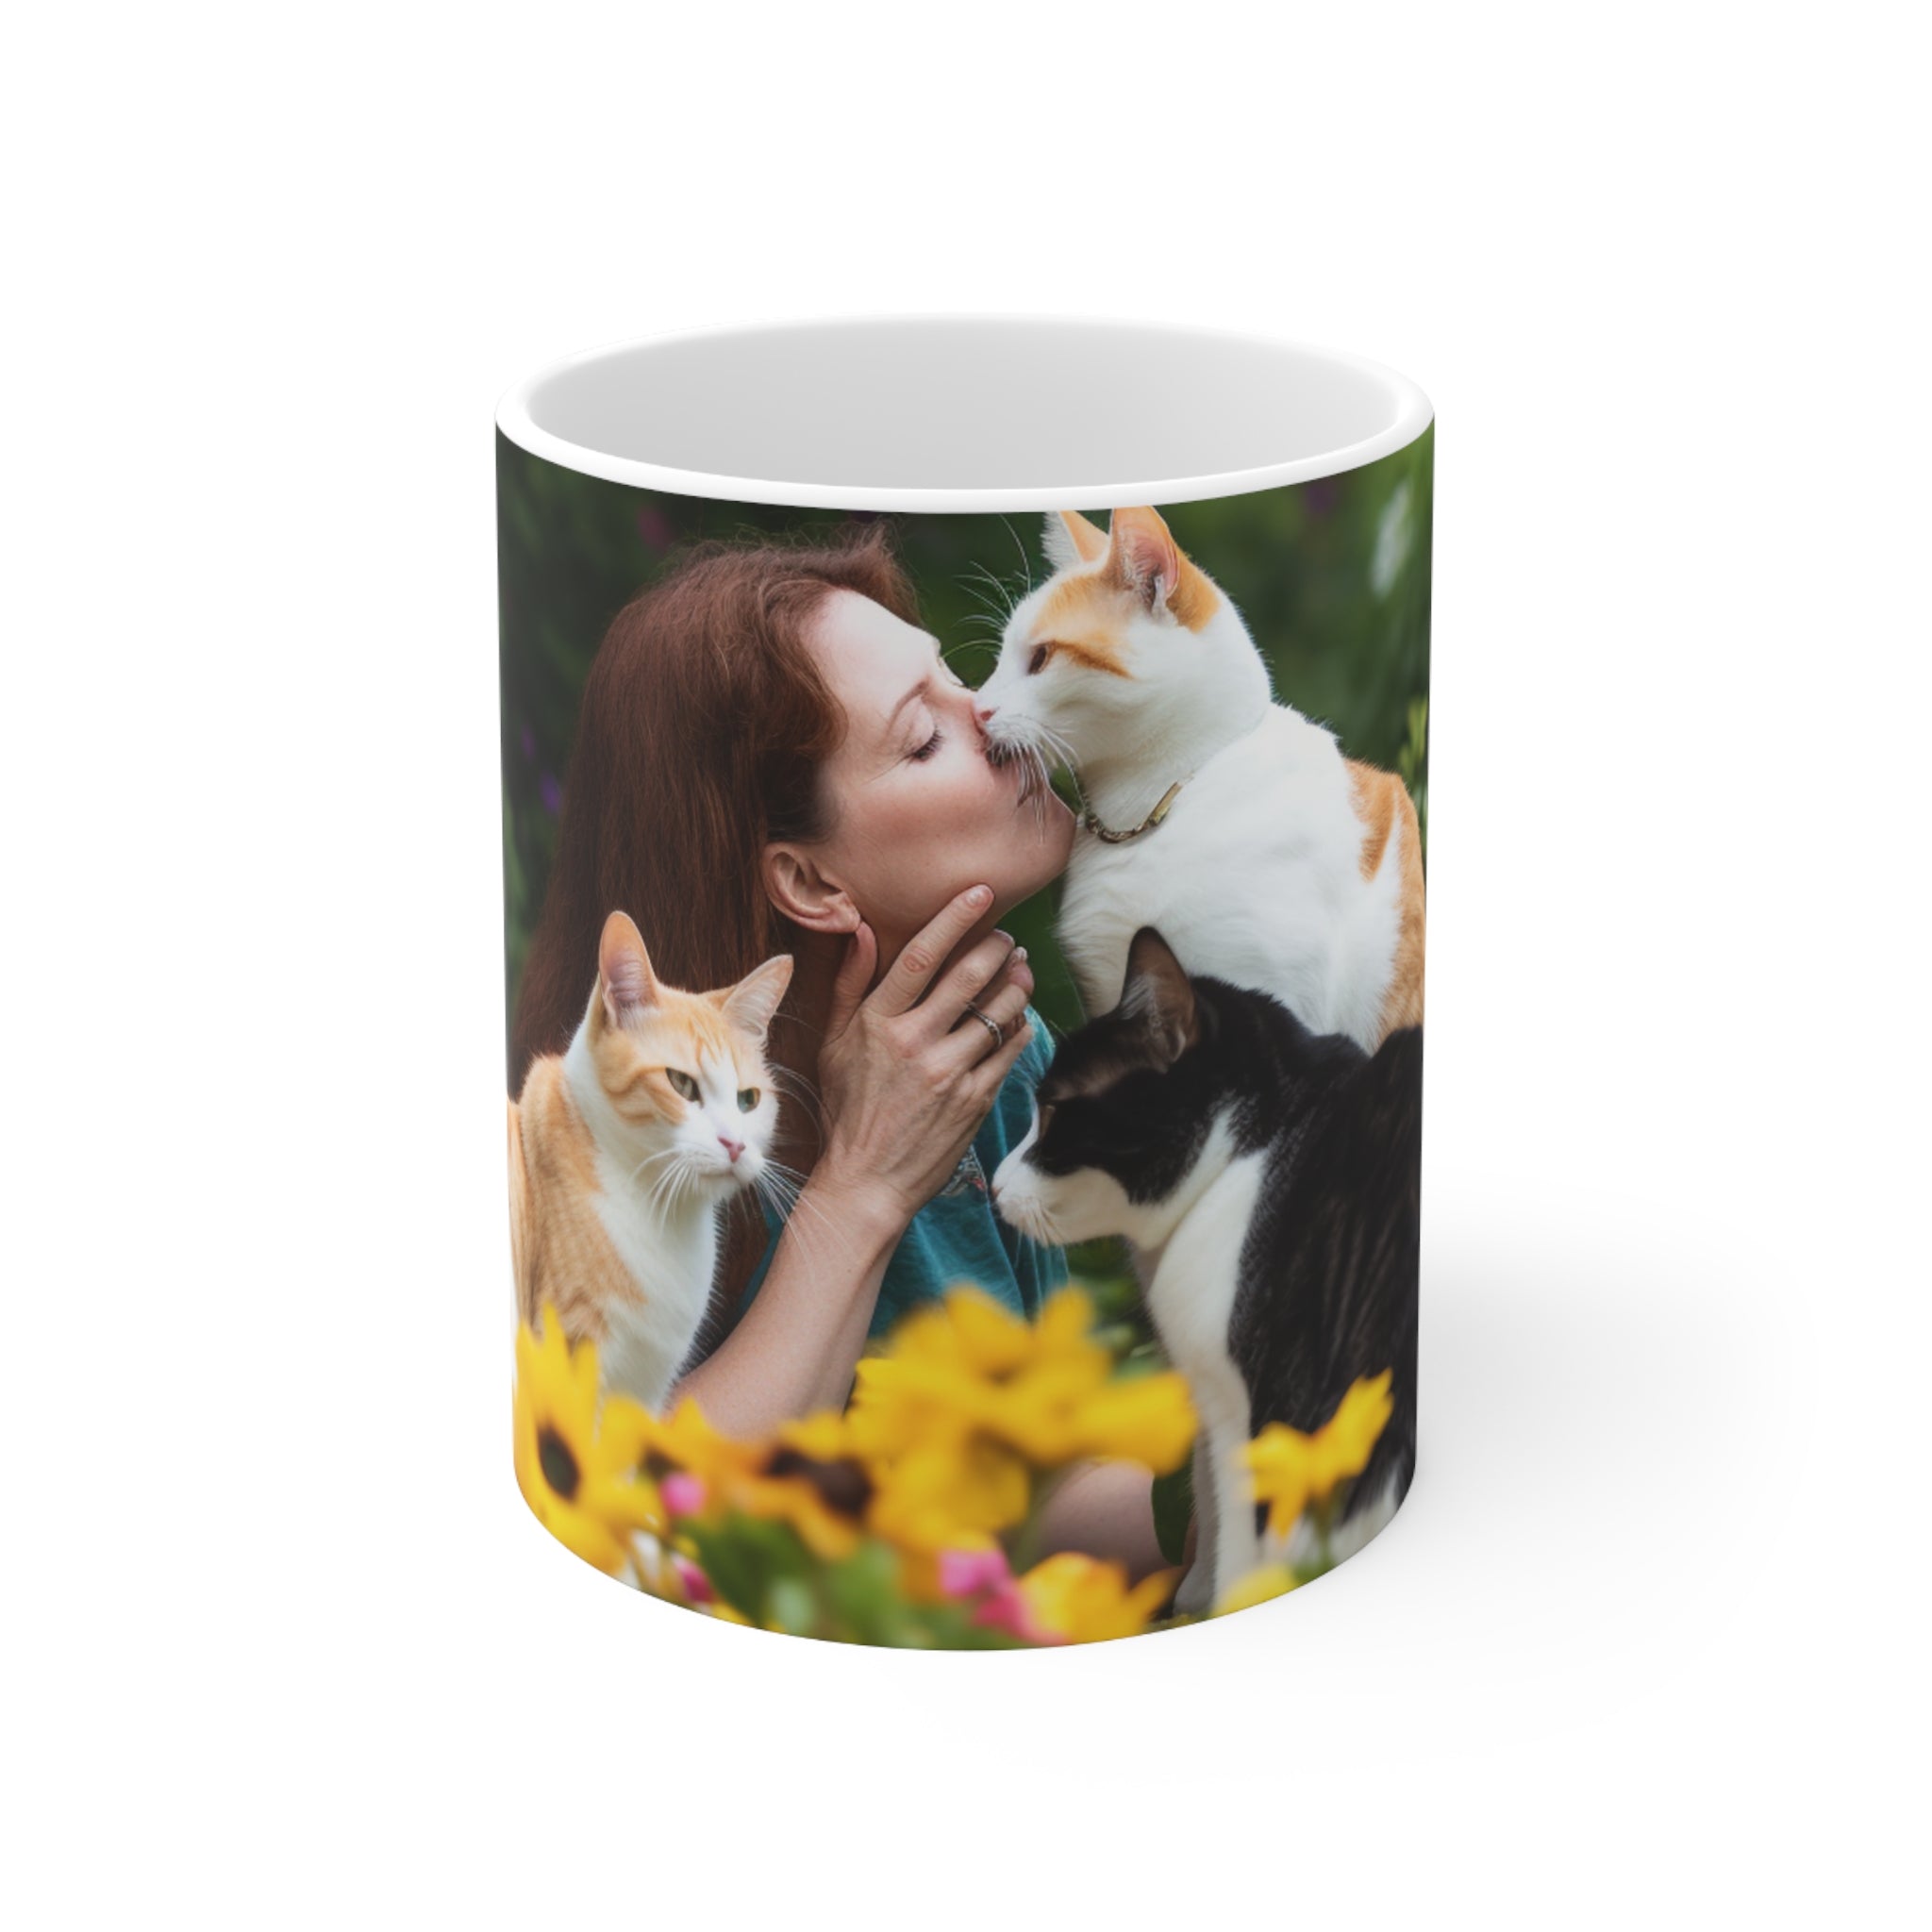 Adorable Garden Cat Feline Party Ceramic Mug 11oz - Perfect Gift for Cat Lovers & Garden Enthusiasts Gift for Pet Lovers and Cat Owners